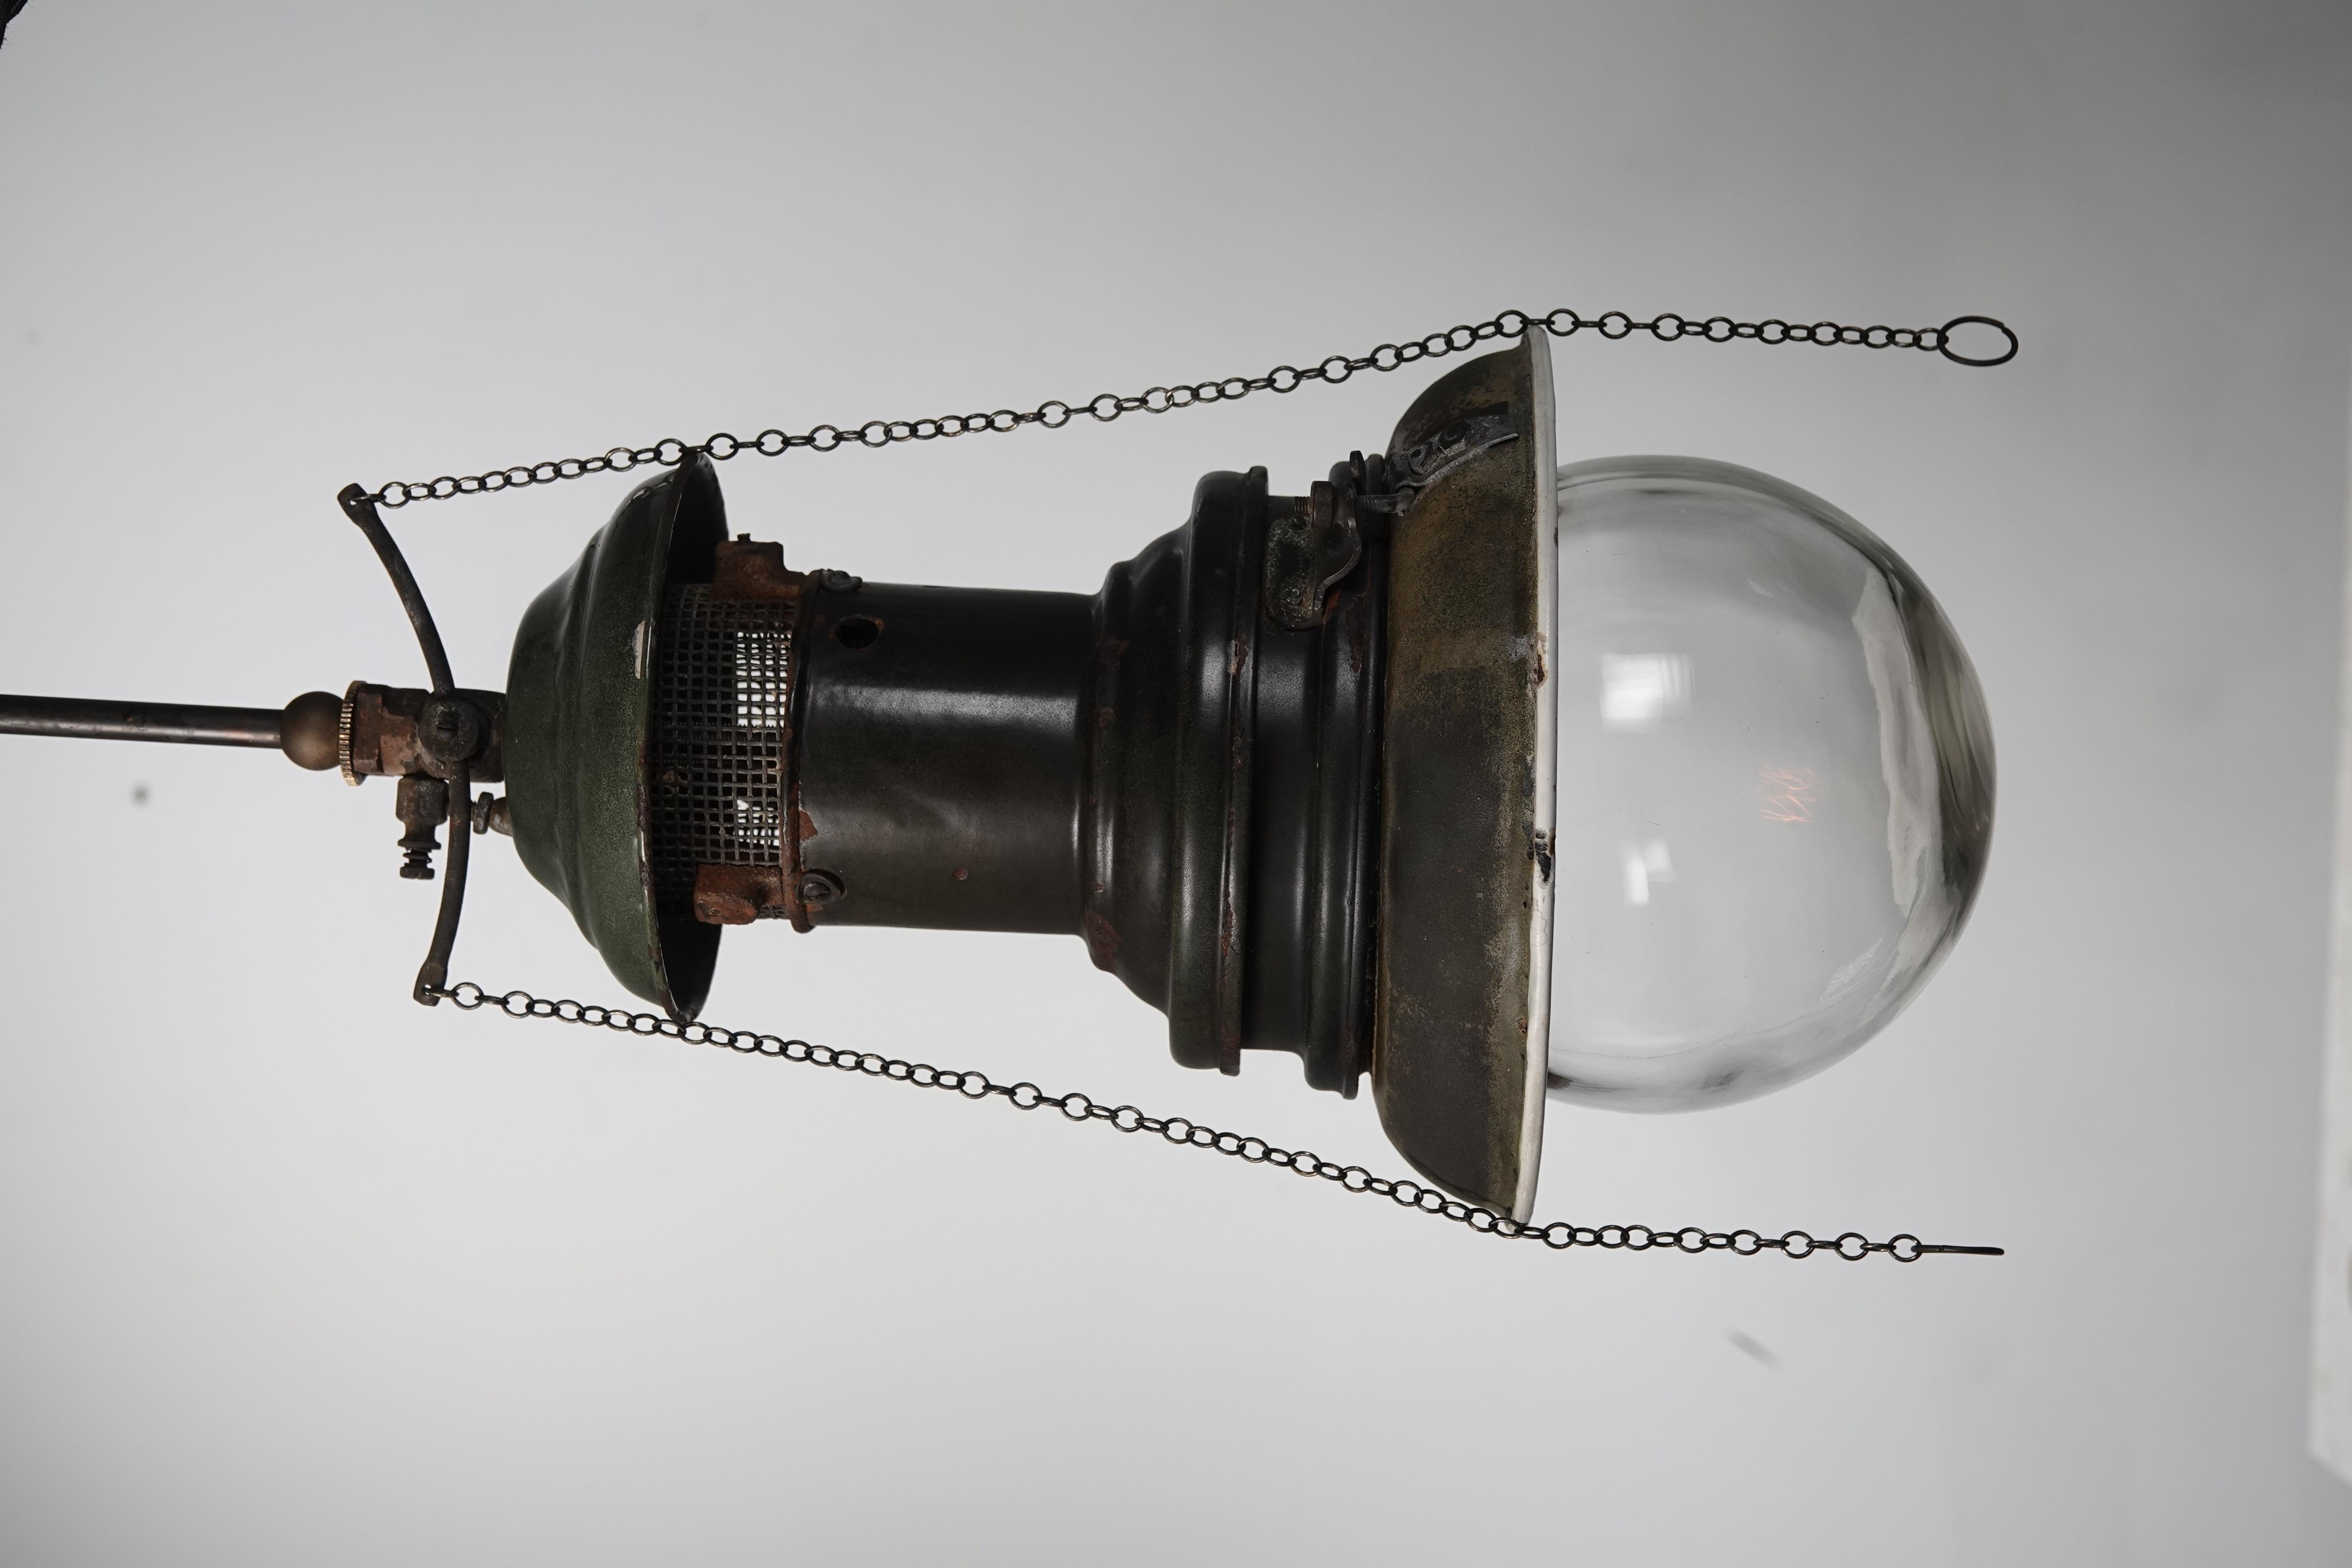 From the start we were drawn to the simple elegance found in utilitarian objects. In addition there needs to be a unique and different feel to every object we pick. Thats what draws us to these gas age lamps. Not the ornate but the simple turn of